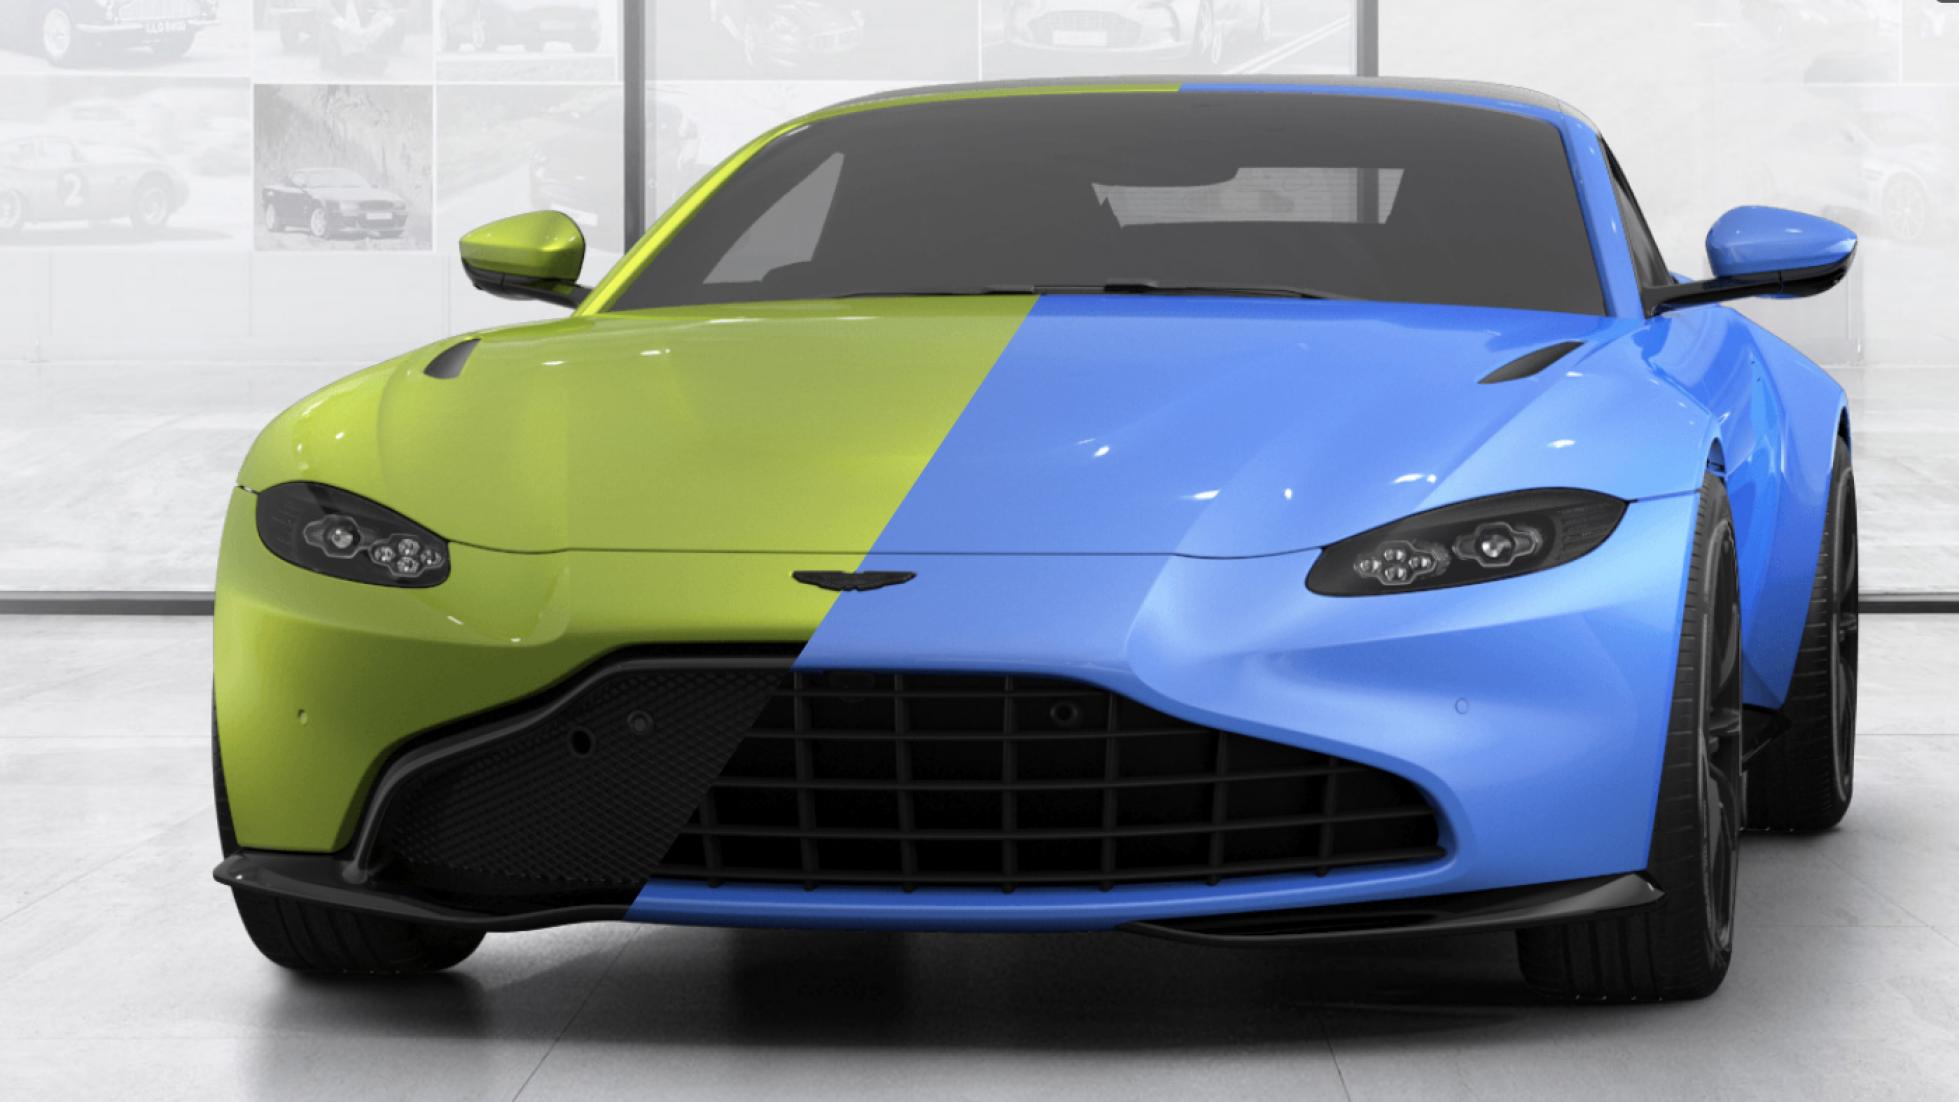 Do you prefer the old Vantage grille or the new one?